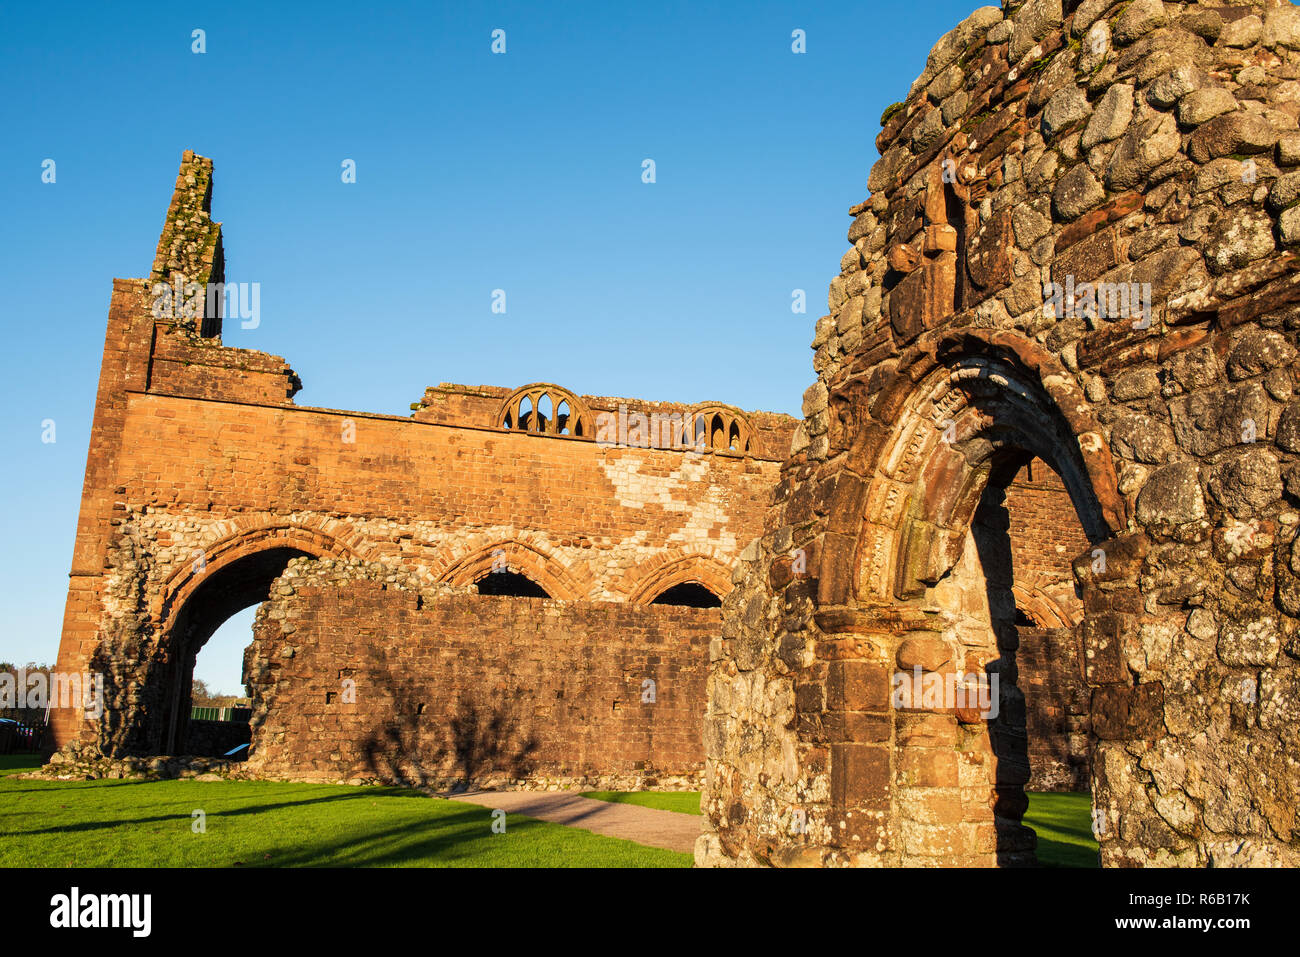 The Abbey of Dulce Cor, better known as Sweetheart Abbey, New Abbey, Dumfries and Galloway, Scotland. Stock Photo